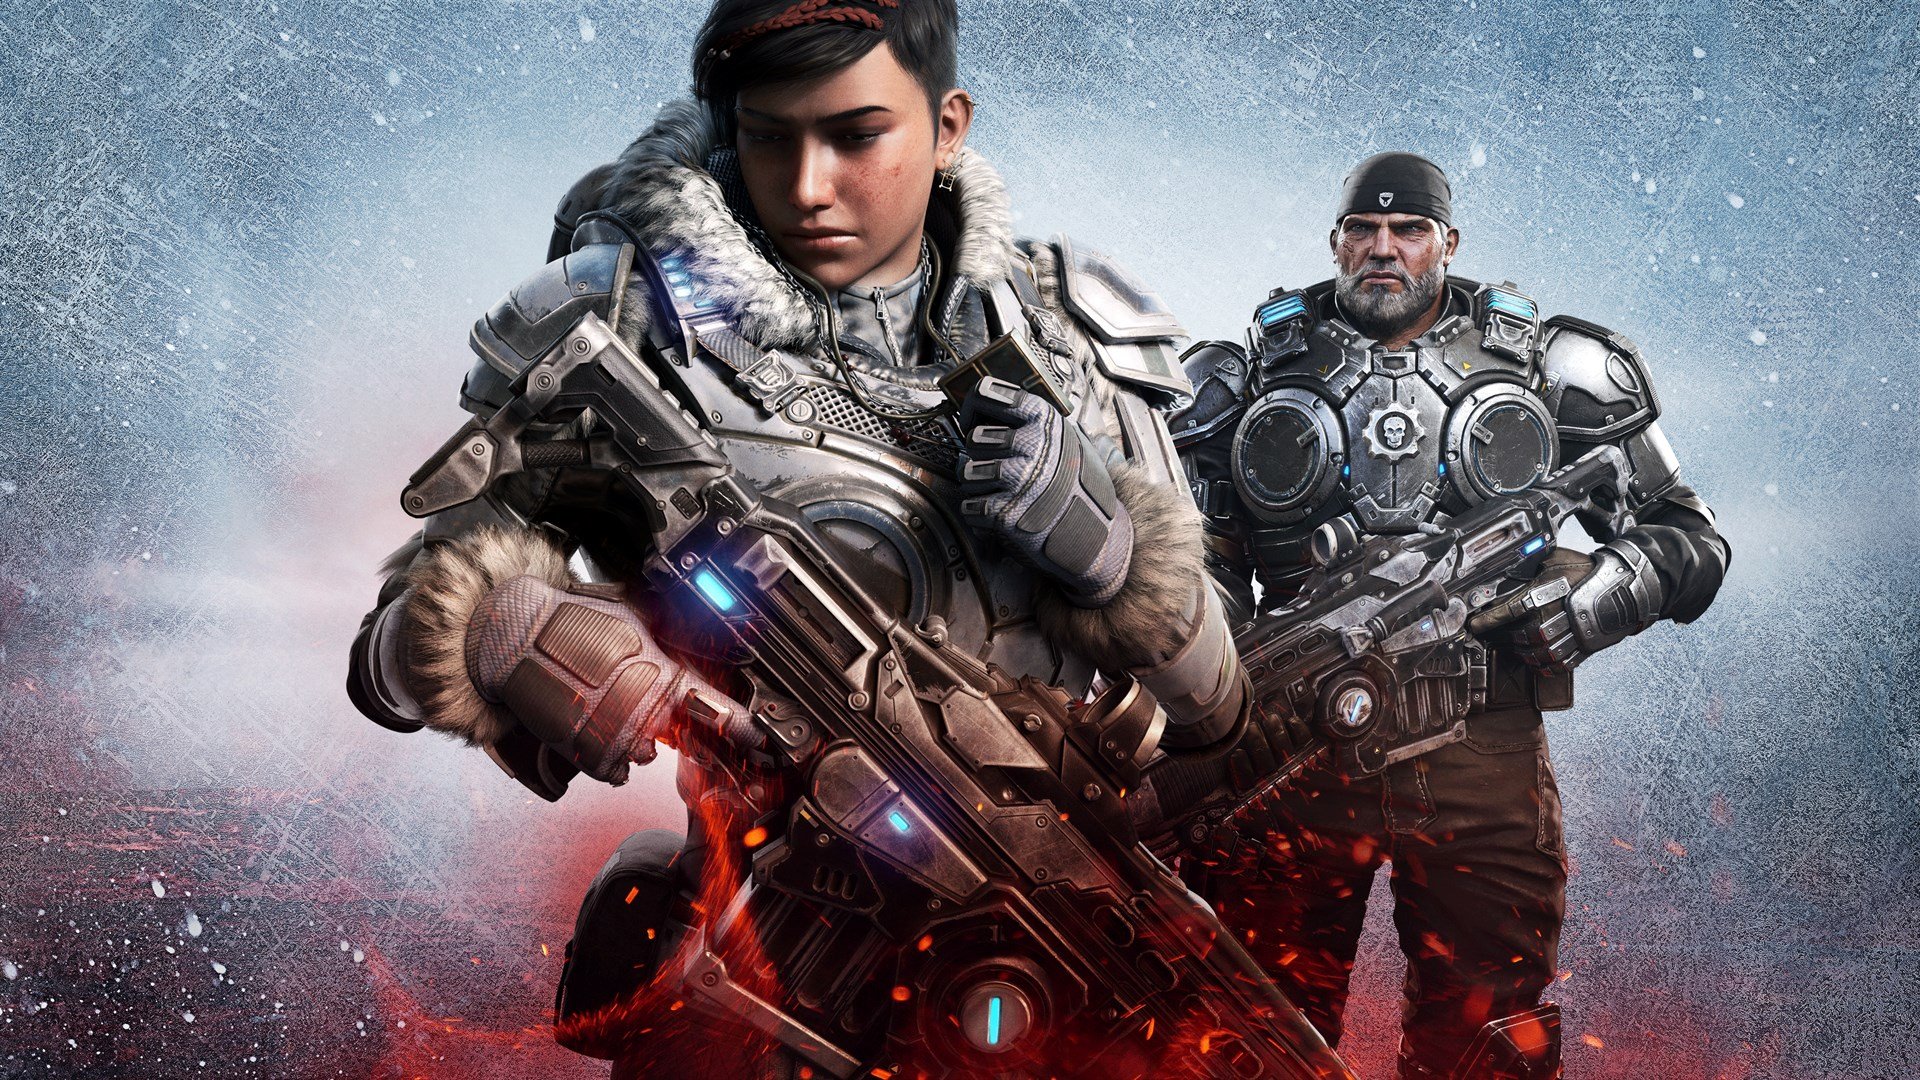 Gears 6 is reportedly The Coalition's next game after two other